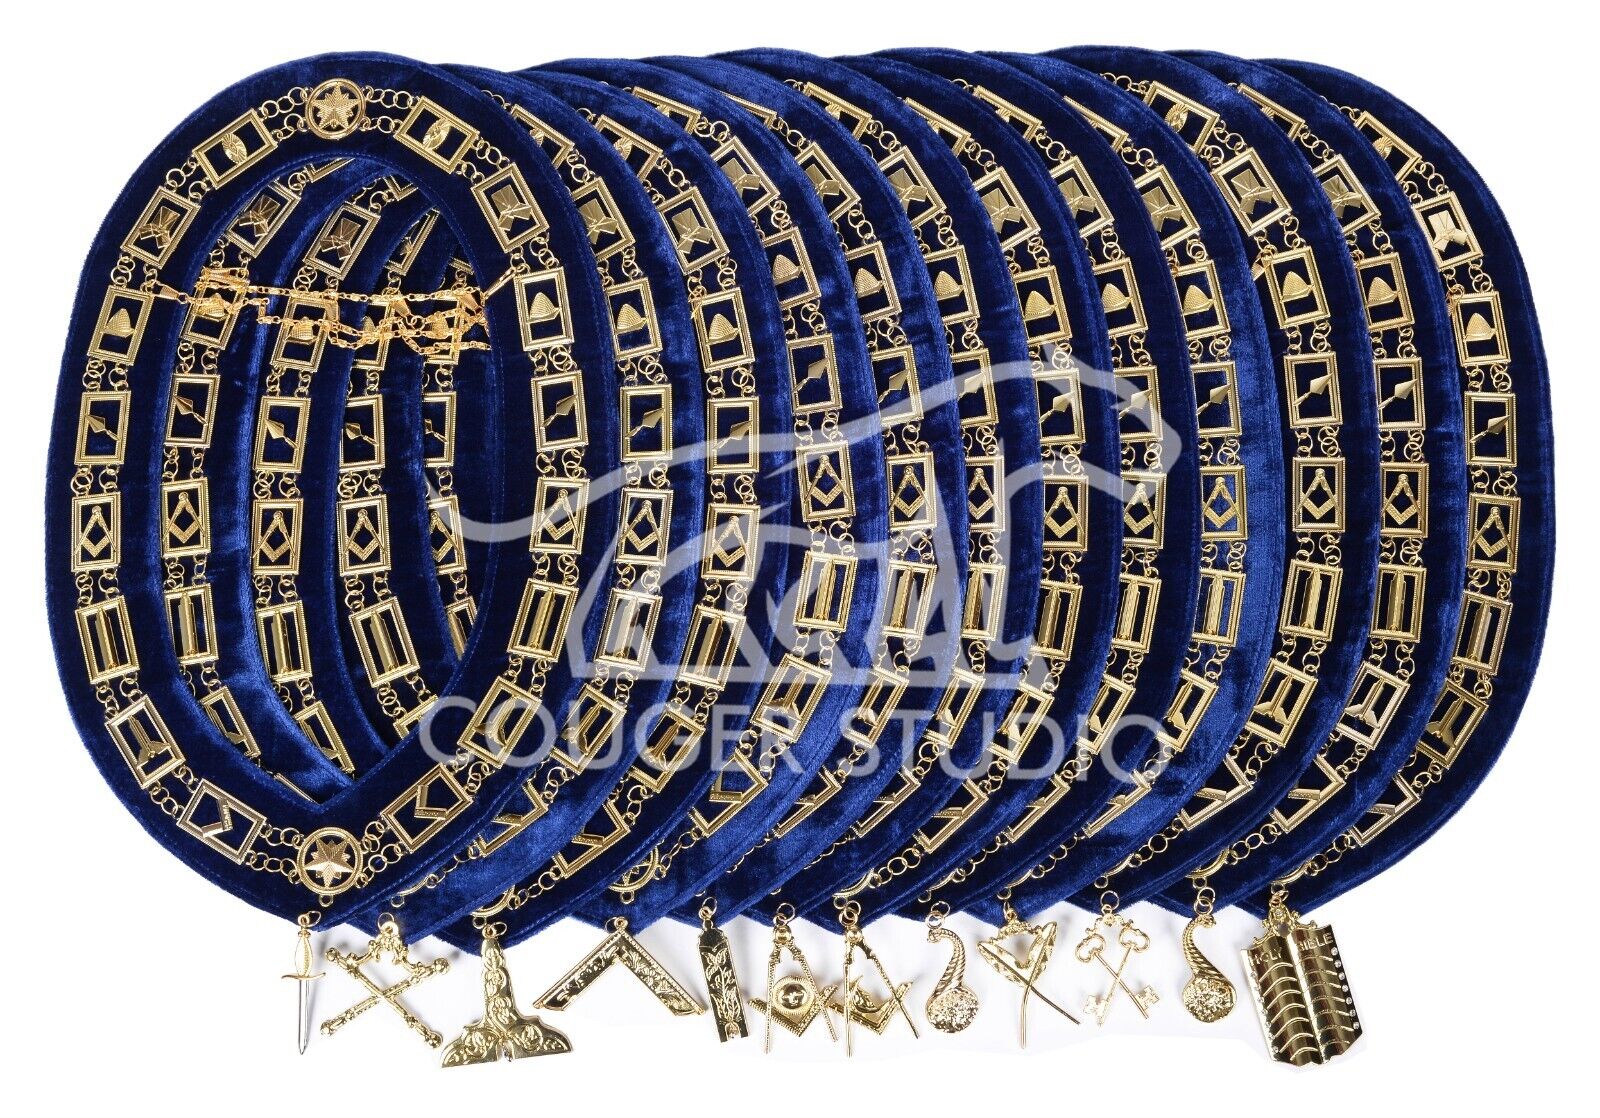 Masonic Regalia Blue Lodge Chain Collar With Officer Golden Jewels Set Of 12